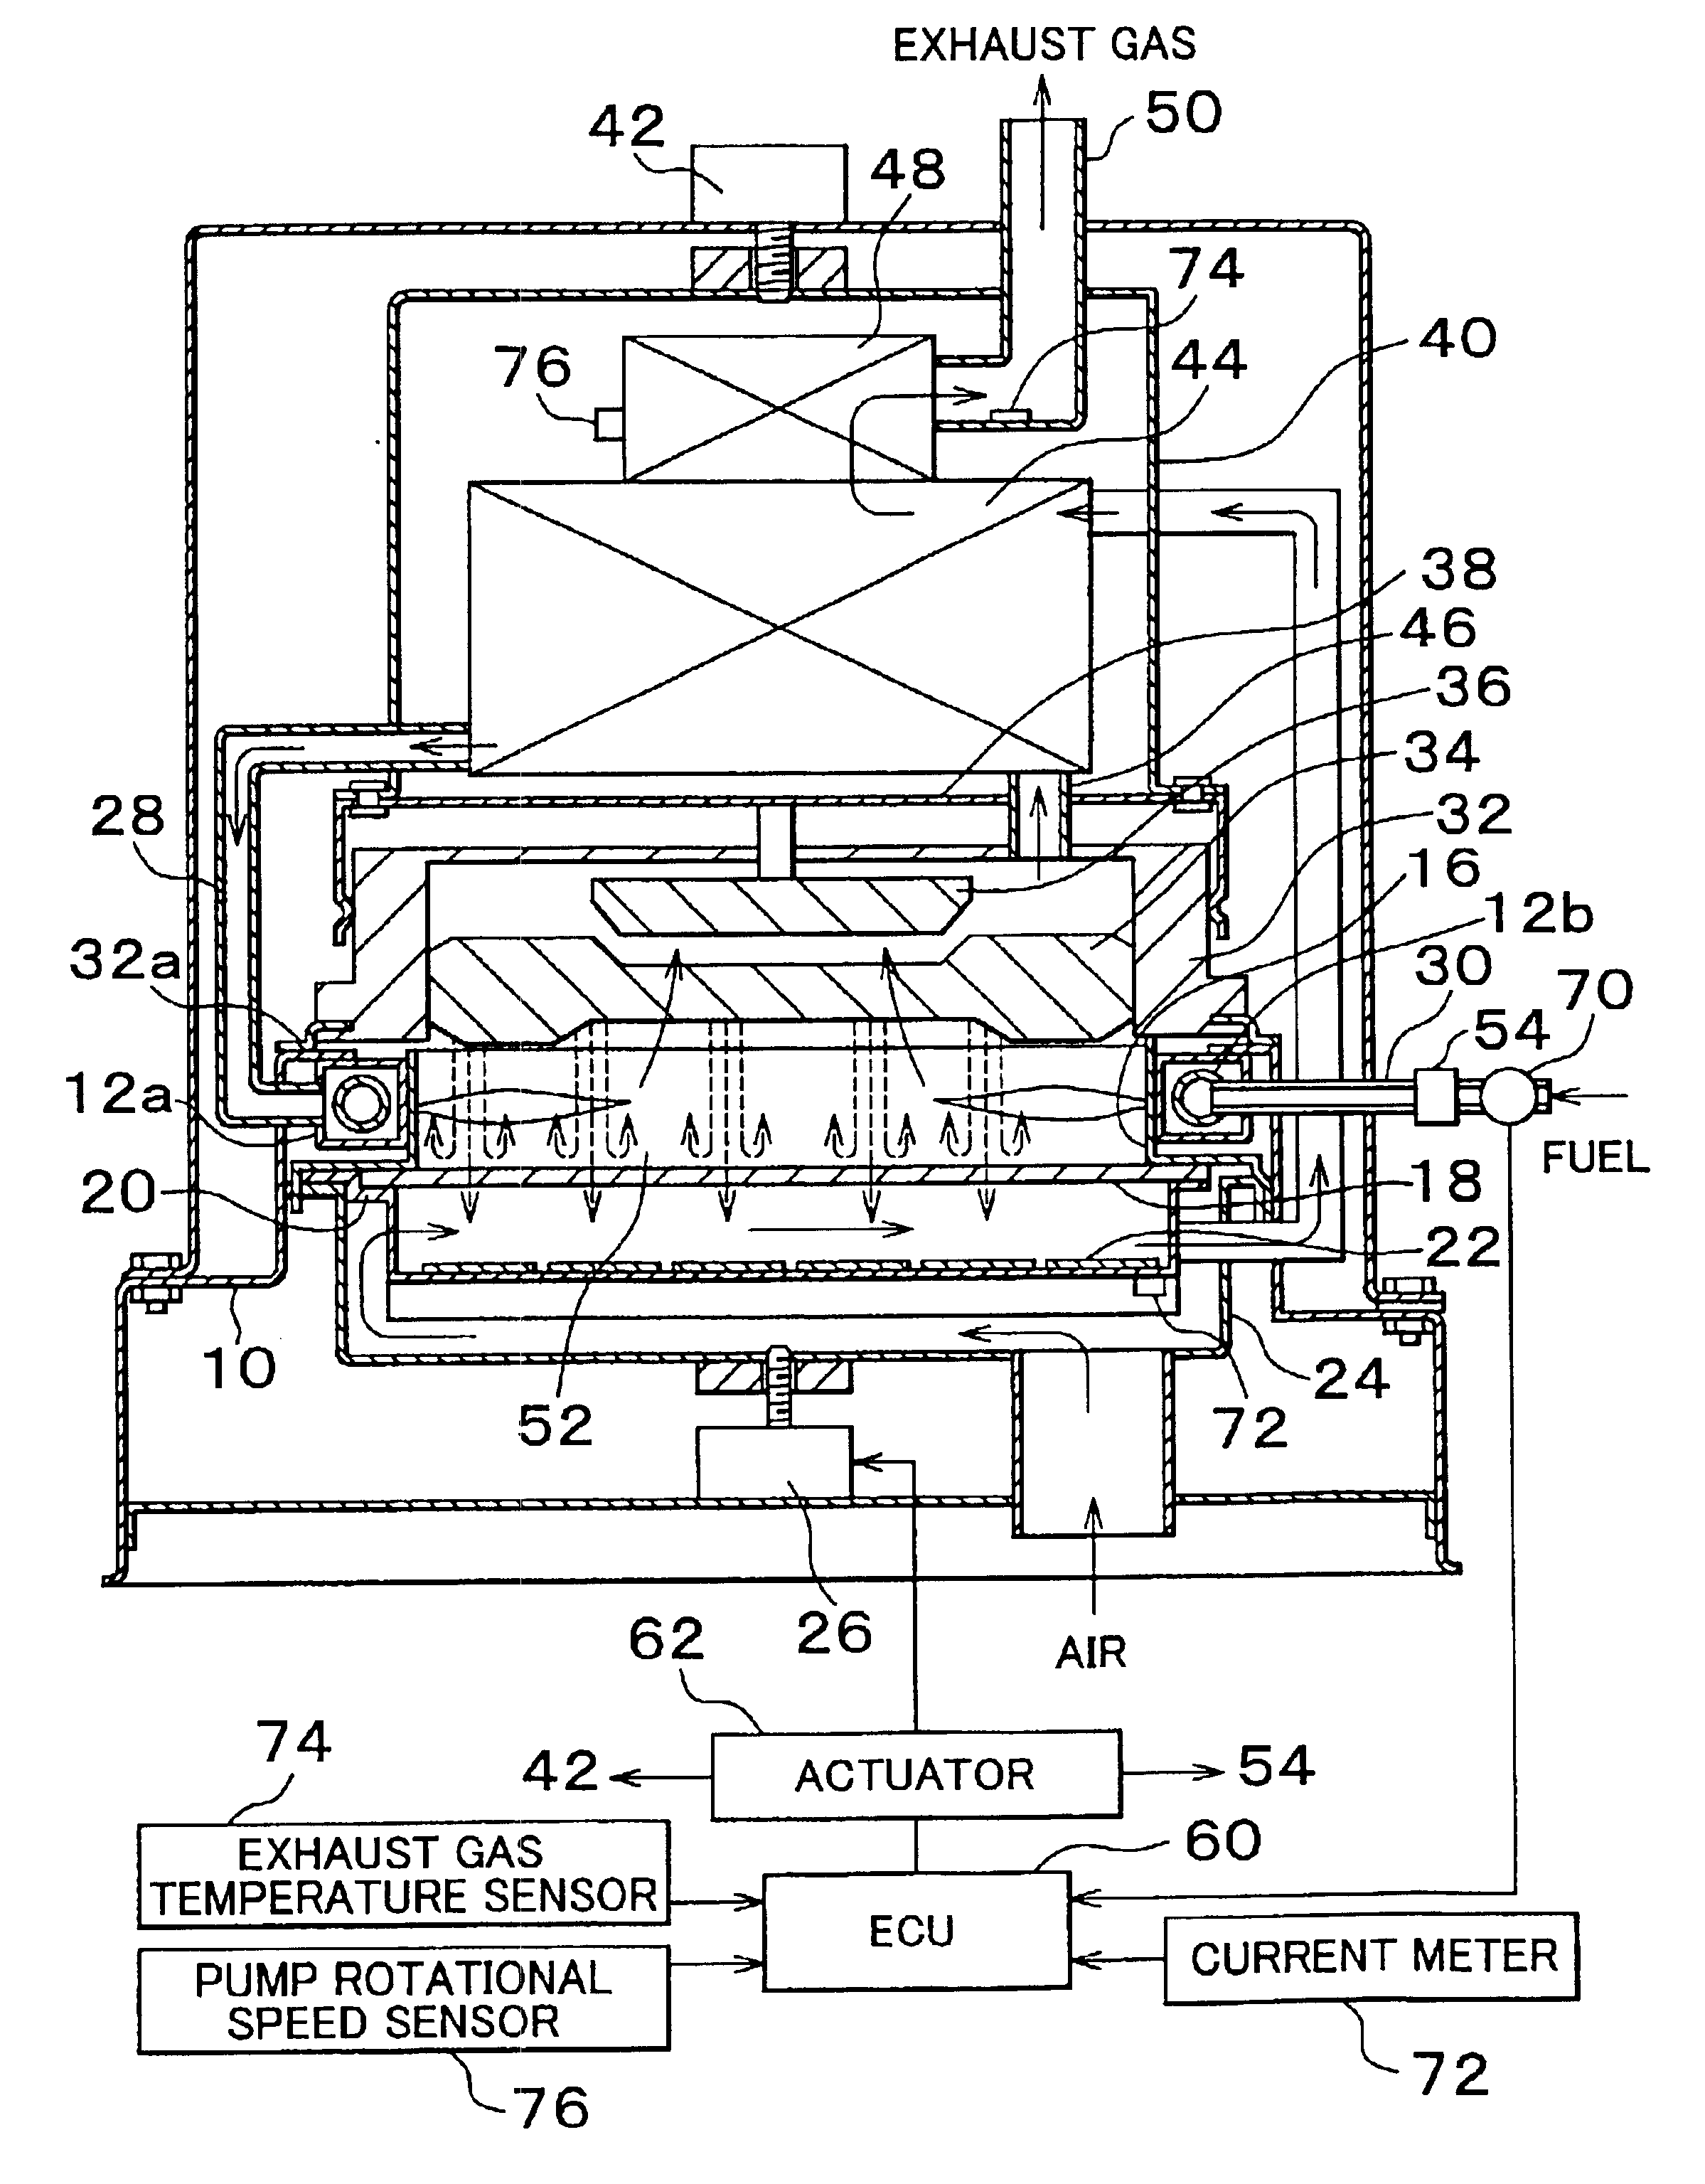 Photothermal power generation device and method